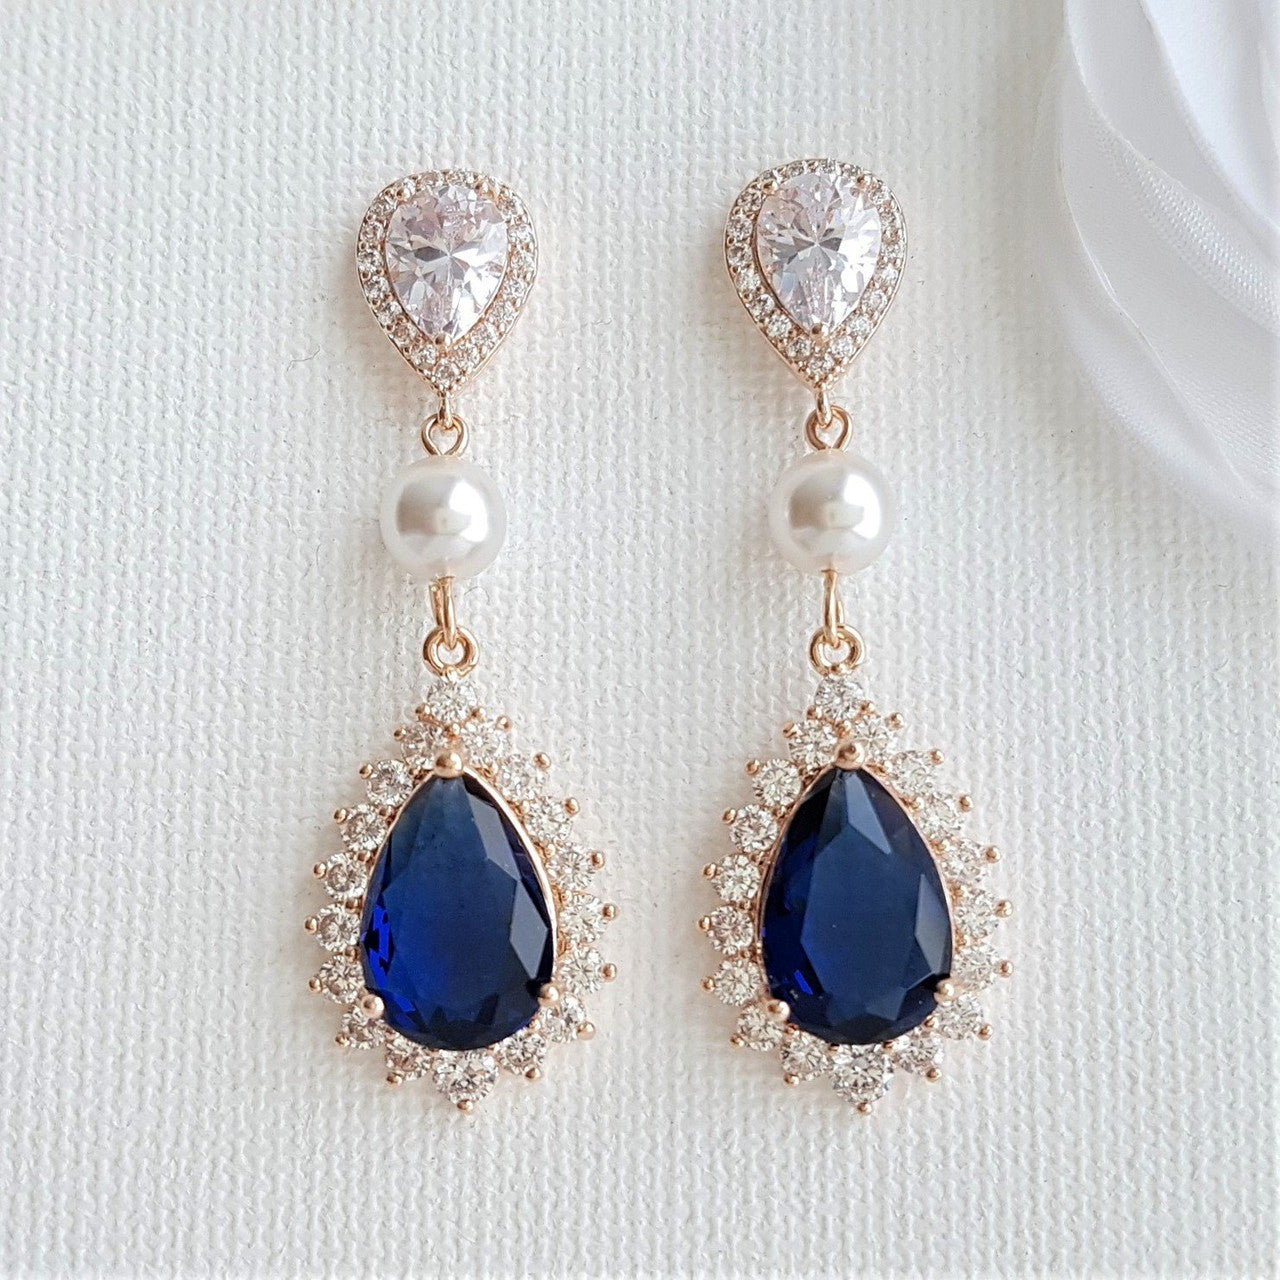 Blue and Rose Gold Crystal Earrings with Pearls Weddings- Poetry Designs